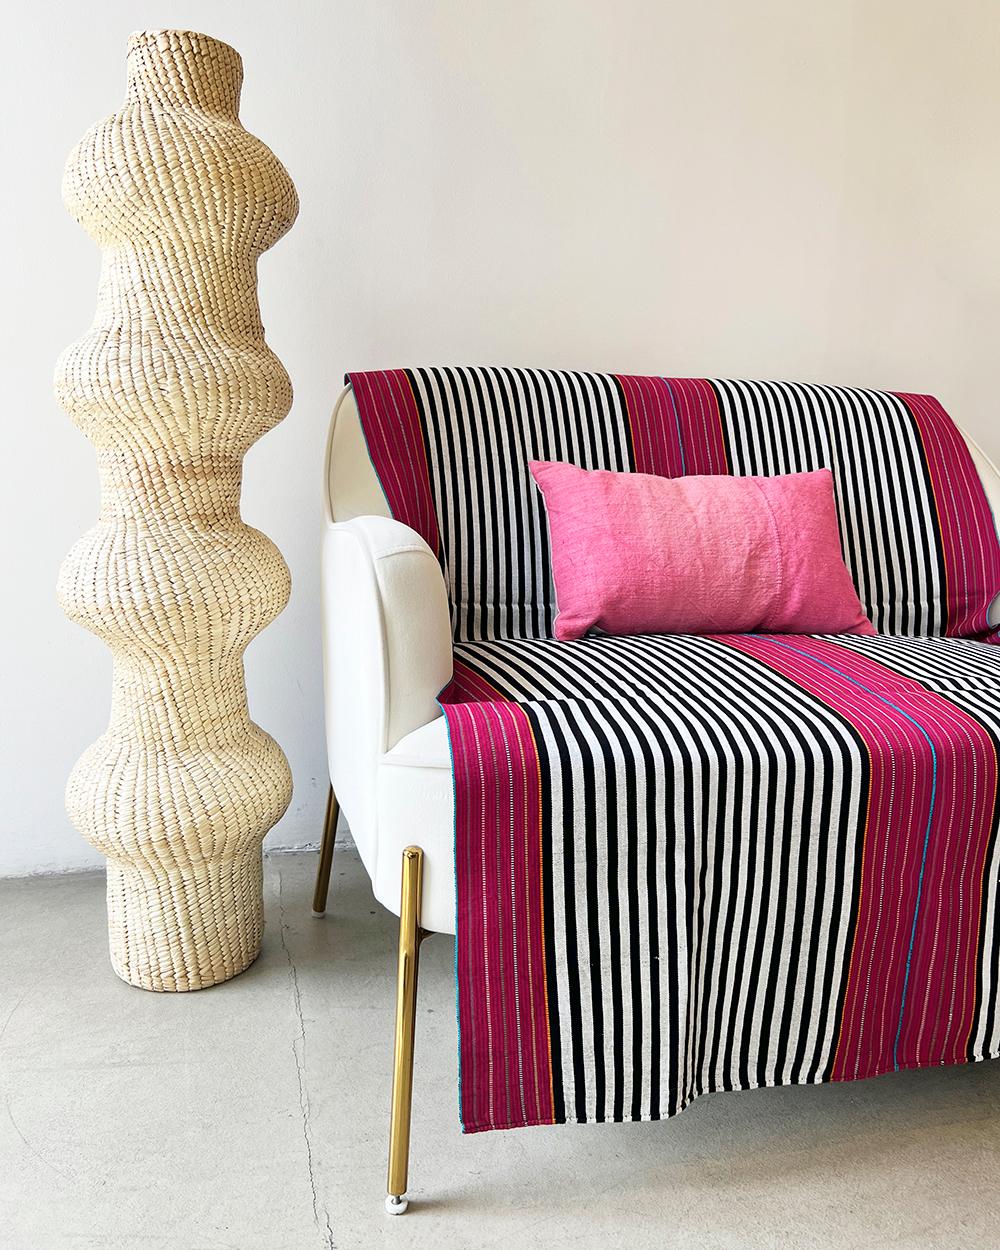 Hand-Woven Sancri Cotton Throw - Handmade Mexican Black, White and Magenta Extended Blanket For Sale